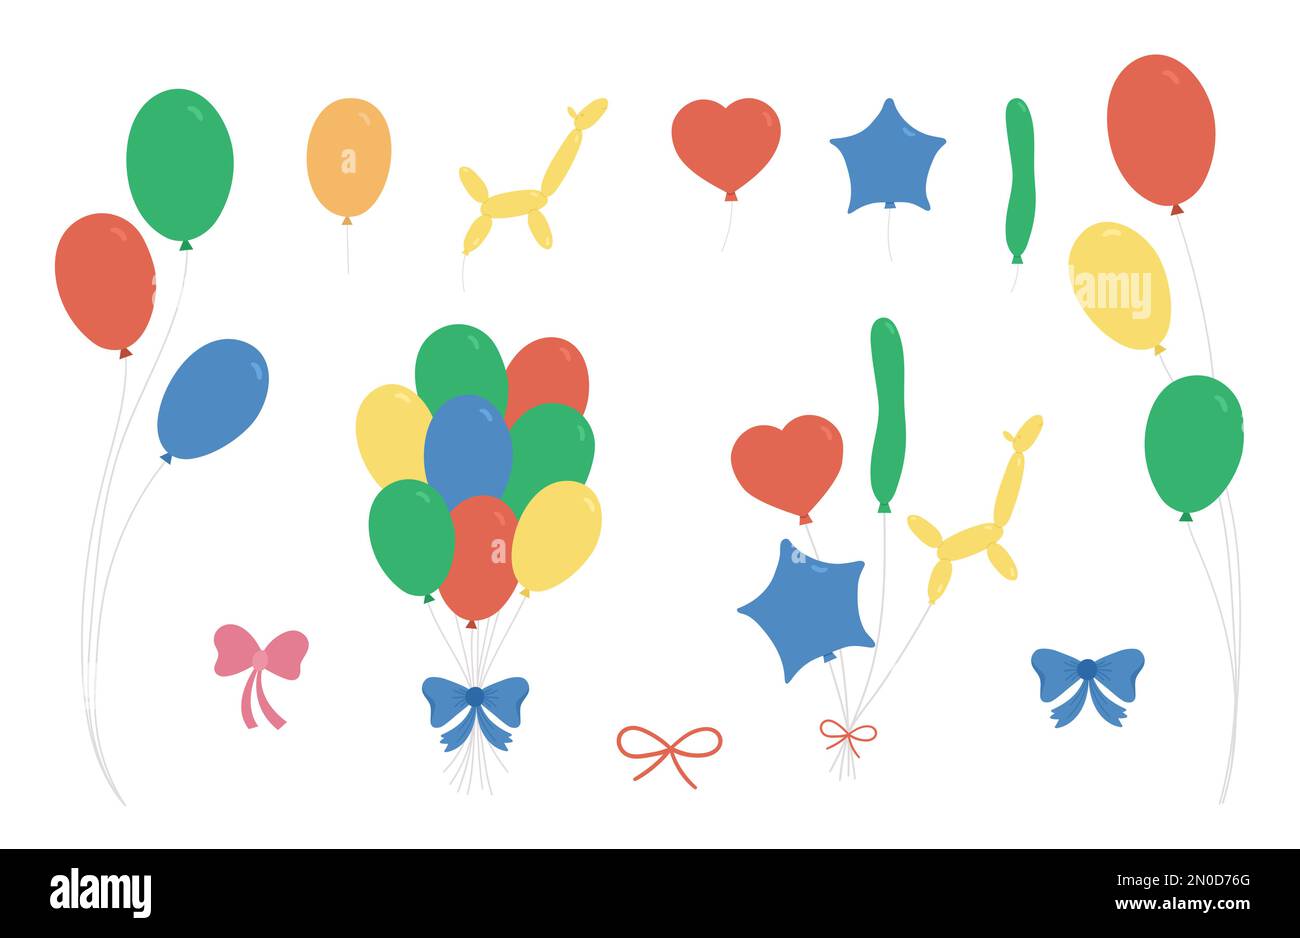 Vector cute balloons set. Funny birthday presents collection for card, poster, print design. Bright holiday illustration for kids. Pack of cheerful ce Stock Vector